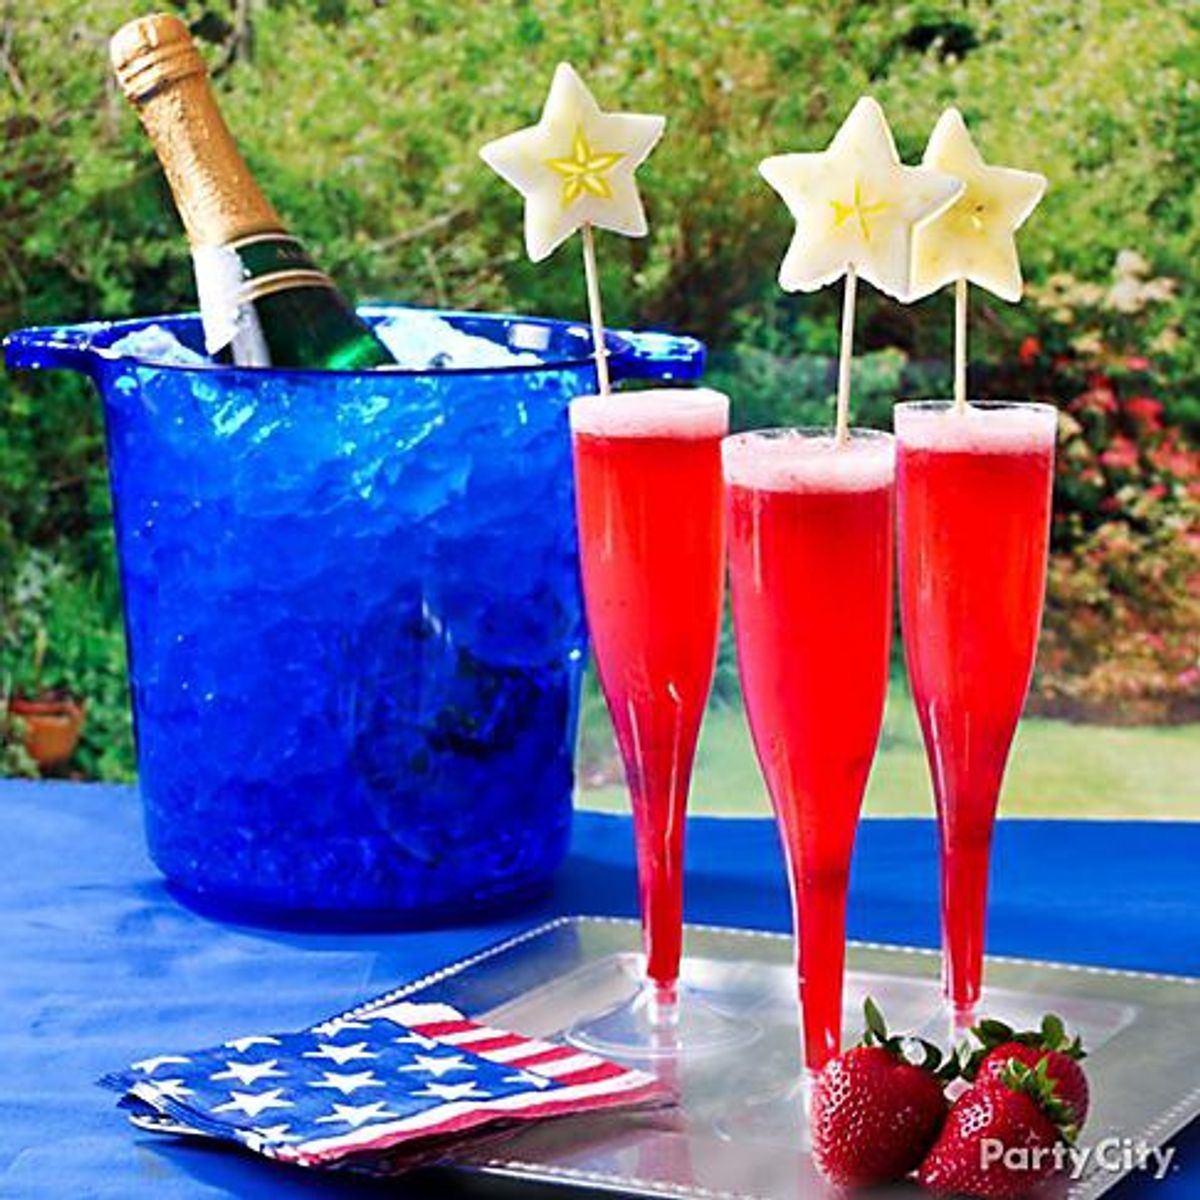 Adult and Kid-Friendly Drinks For Your 4th of July